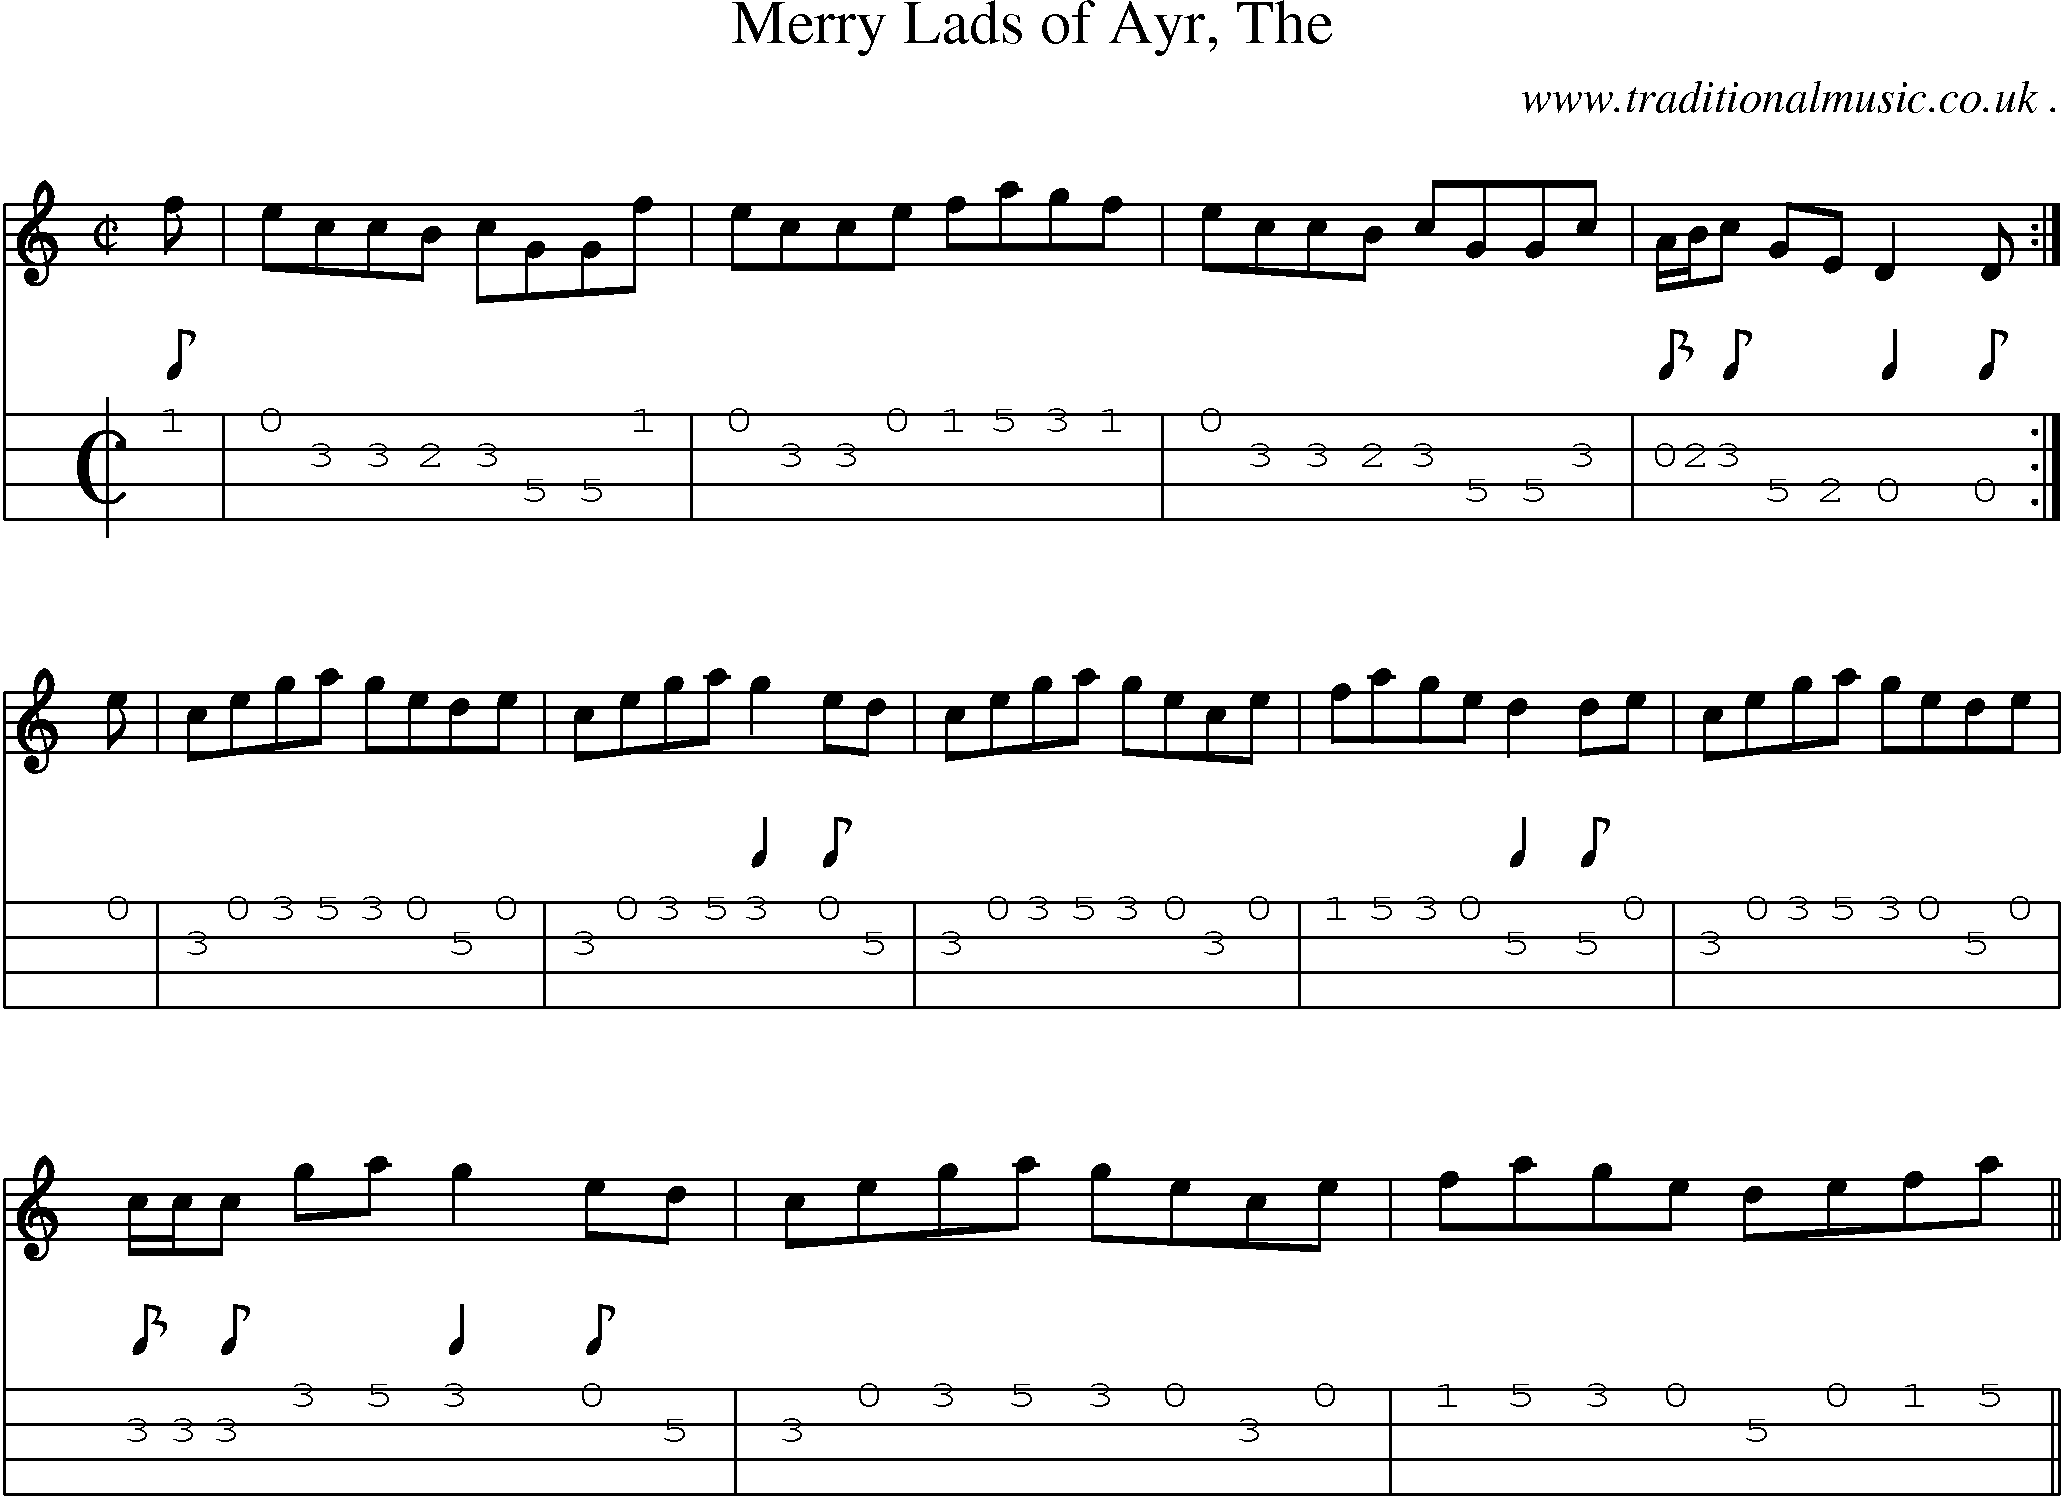 Sheet-music  score, Chords and Mandolin Tabs for Merry Lads Of Ayr The